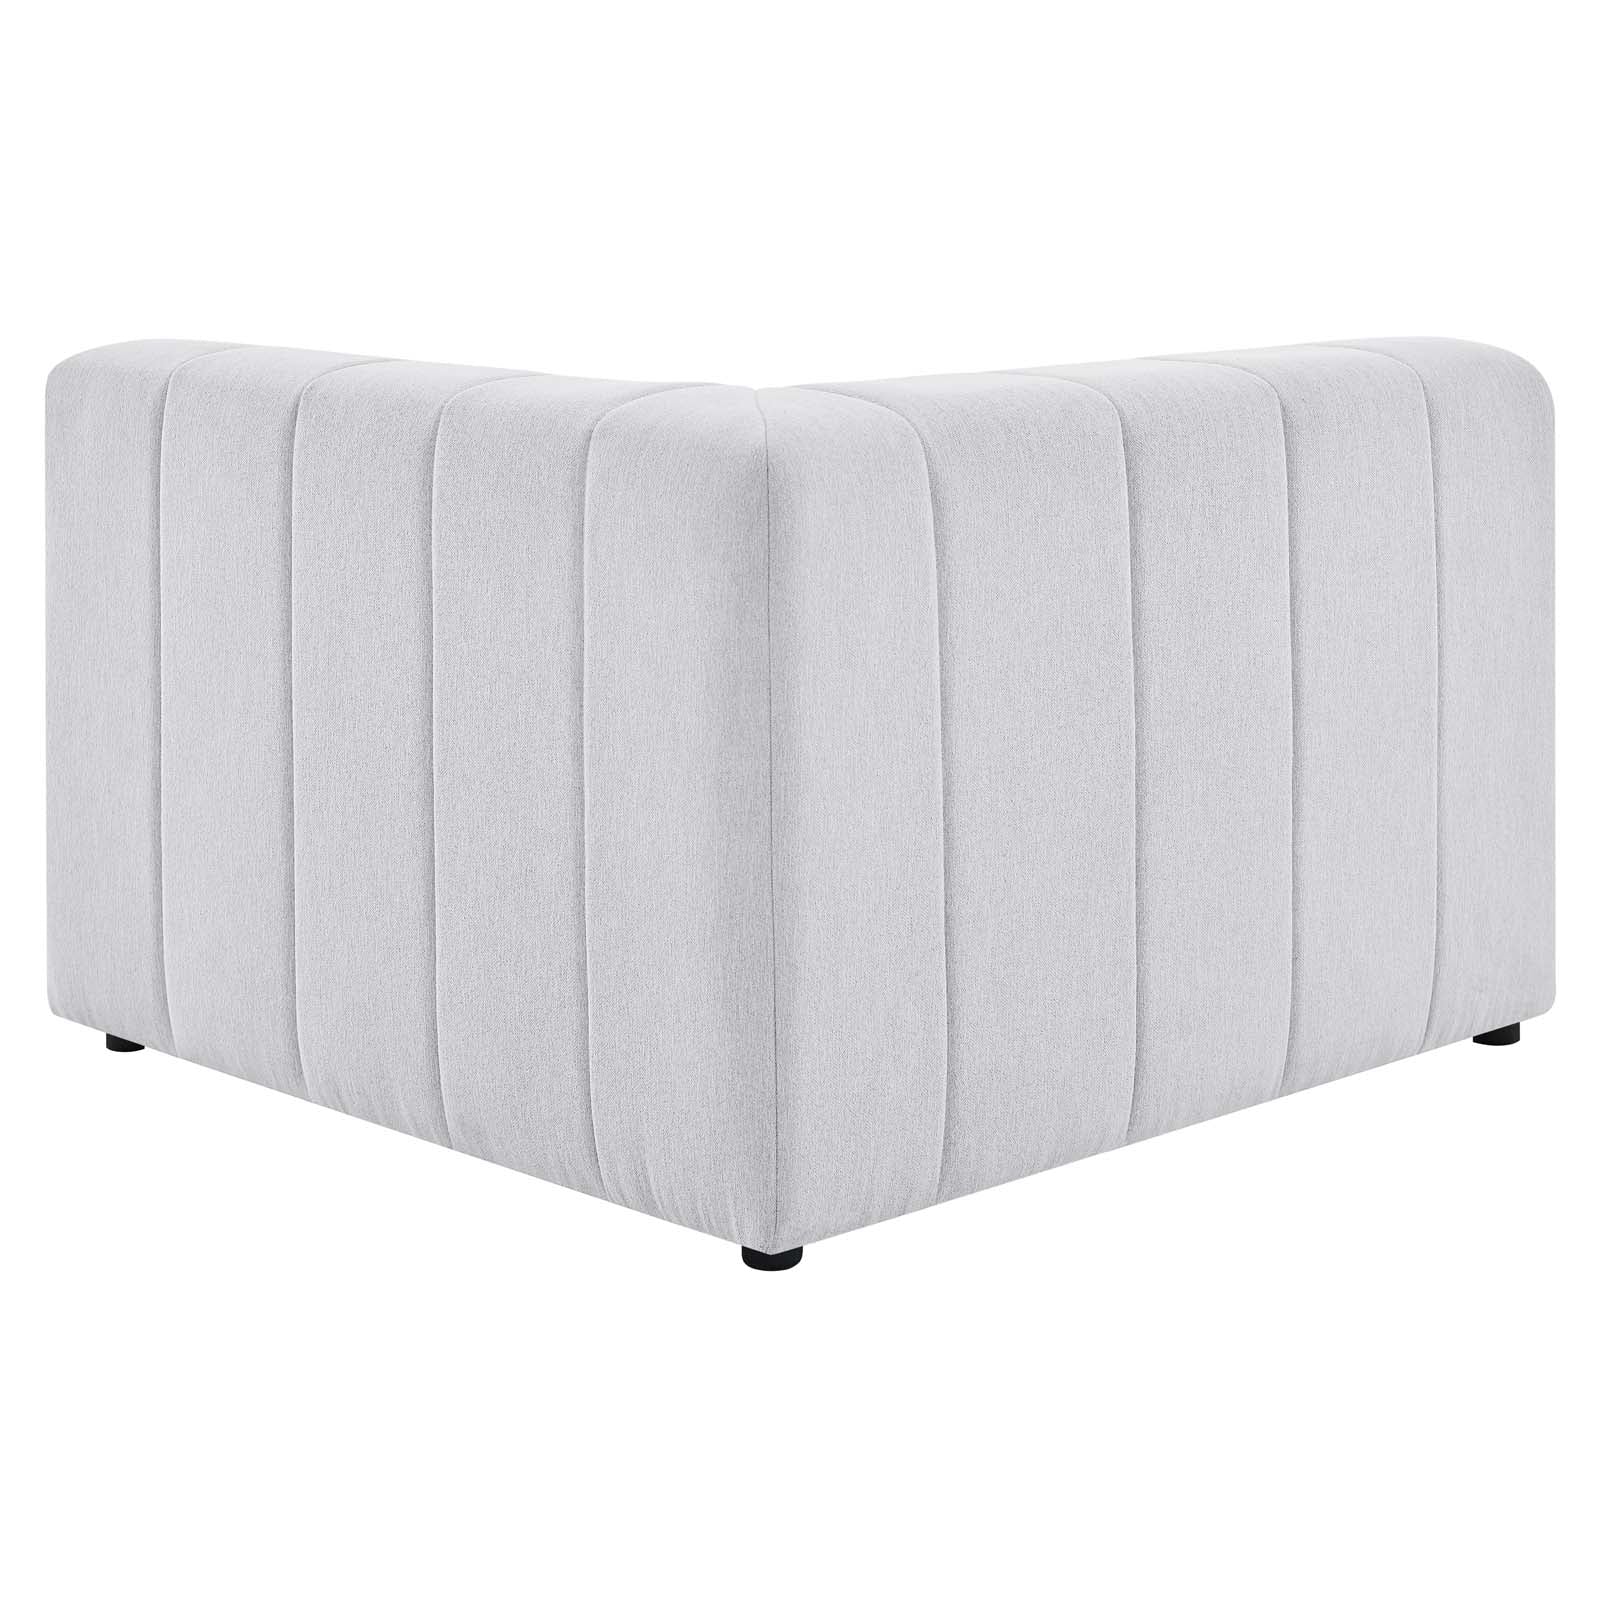 Modway Sectional Sofas - Bartlett Upholstered Fabric 27.5 " H 4-Piece Sectional Sofa Ivory